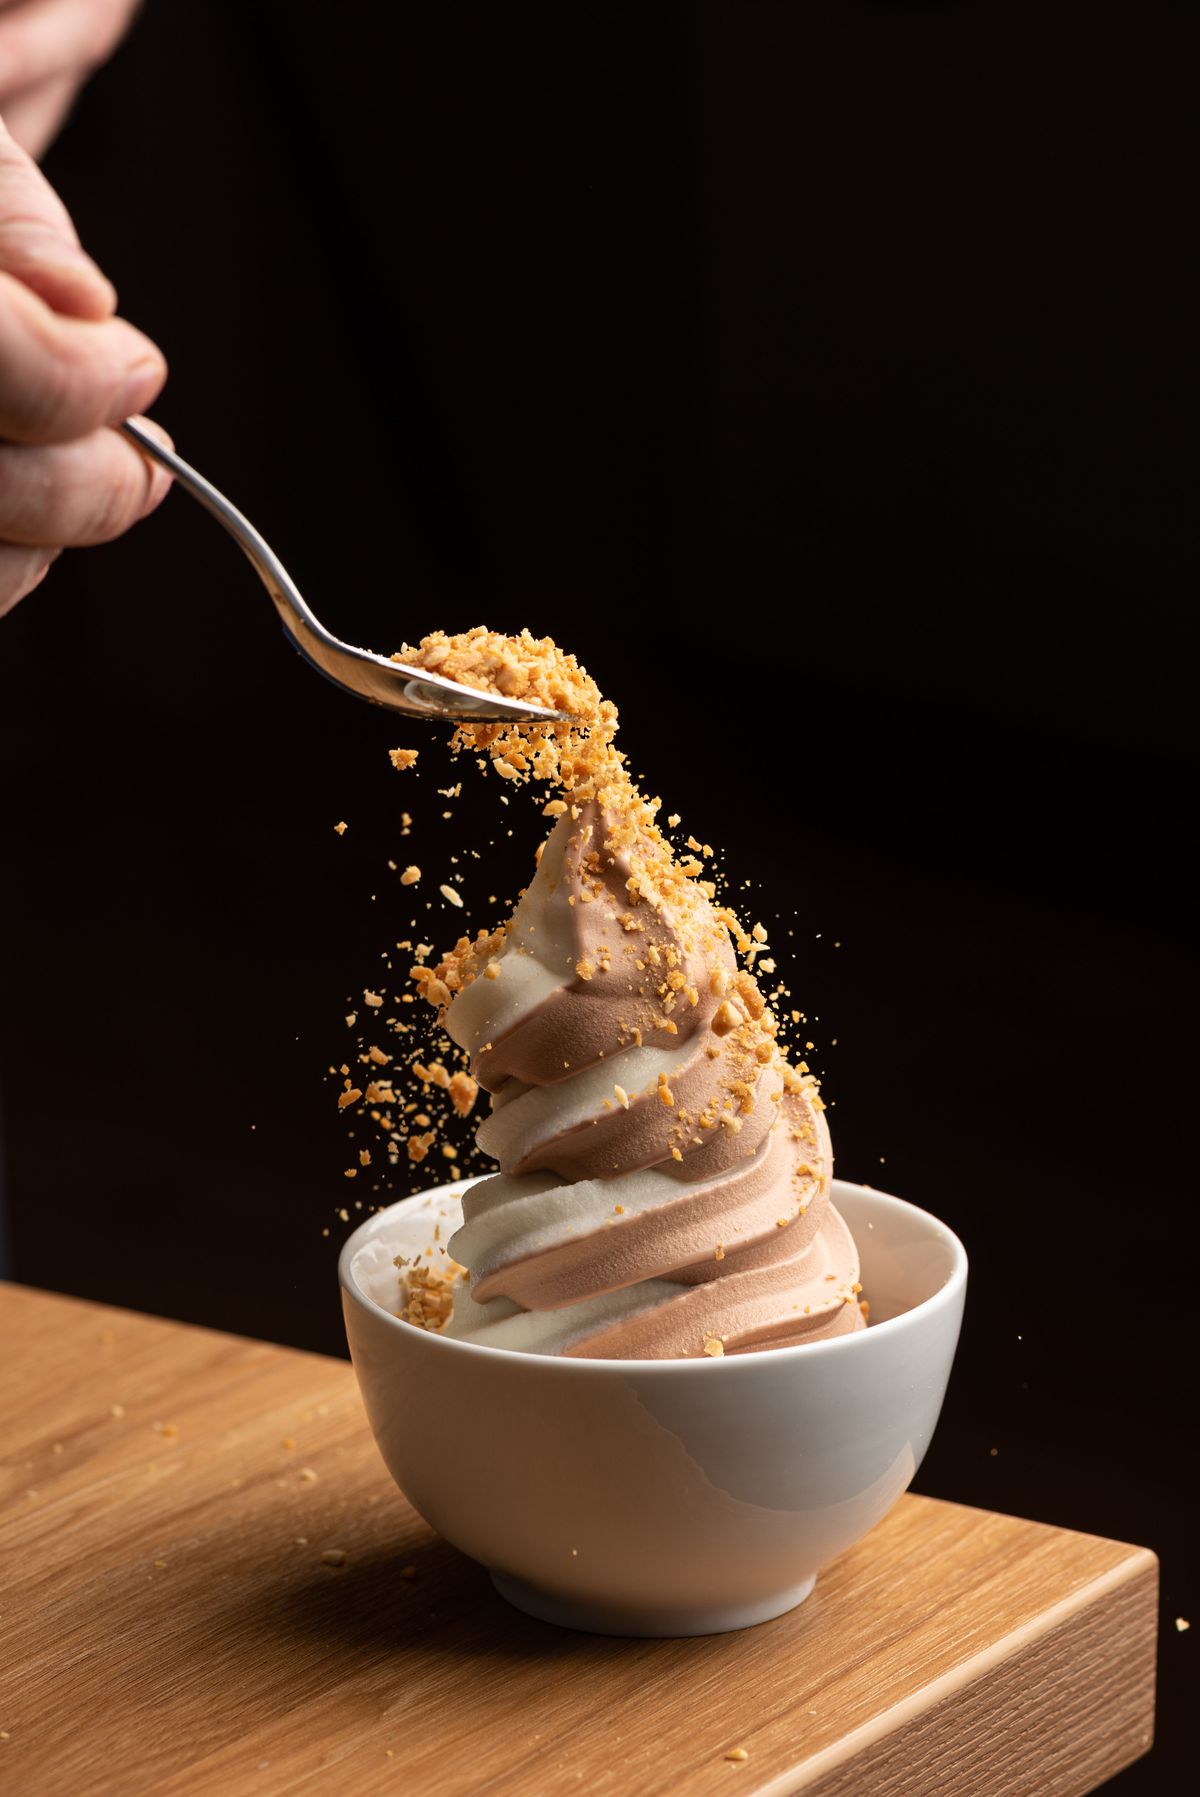 A swirl of mixed soft serve with nuts sprinkled on top in real time.